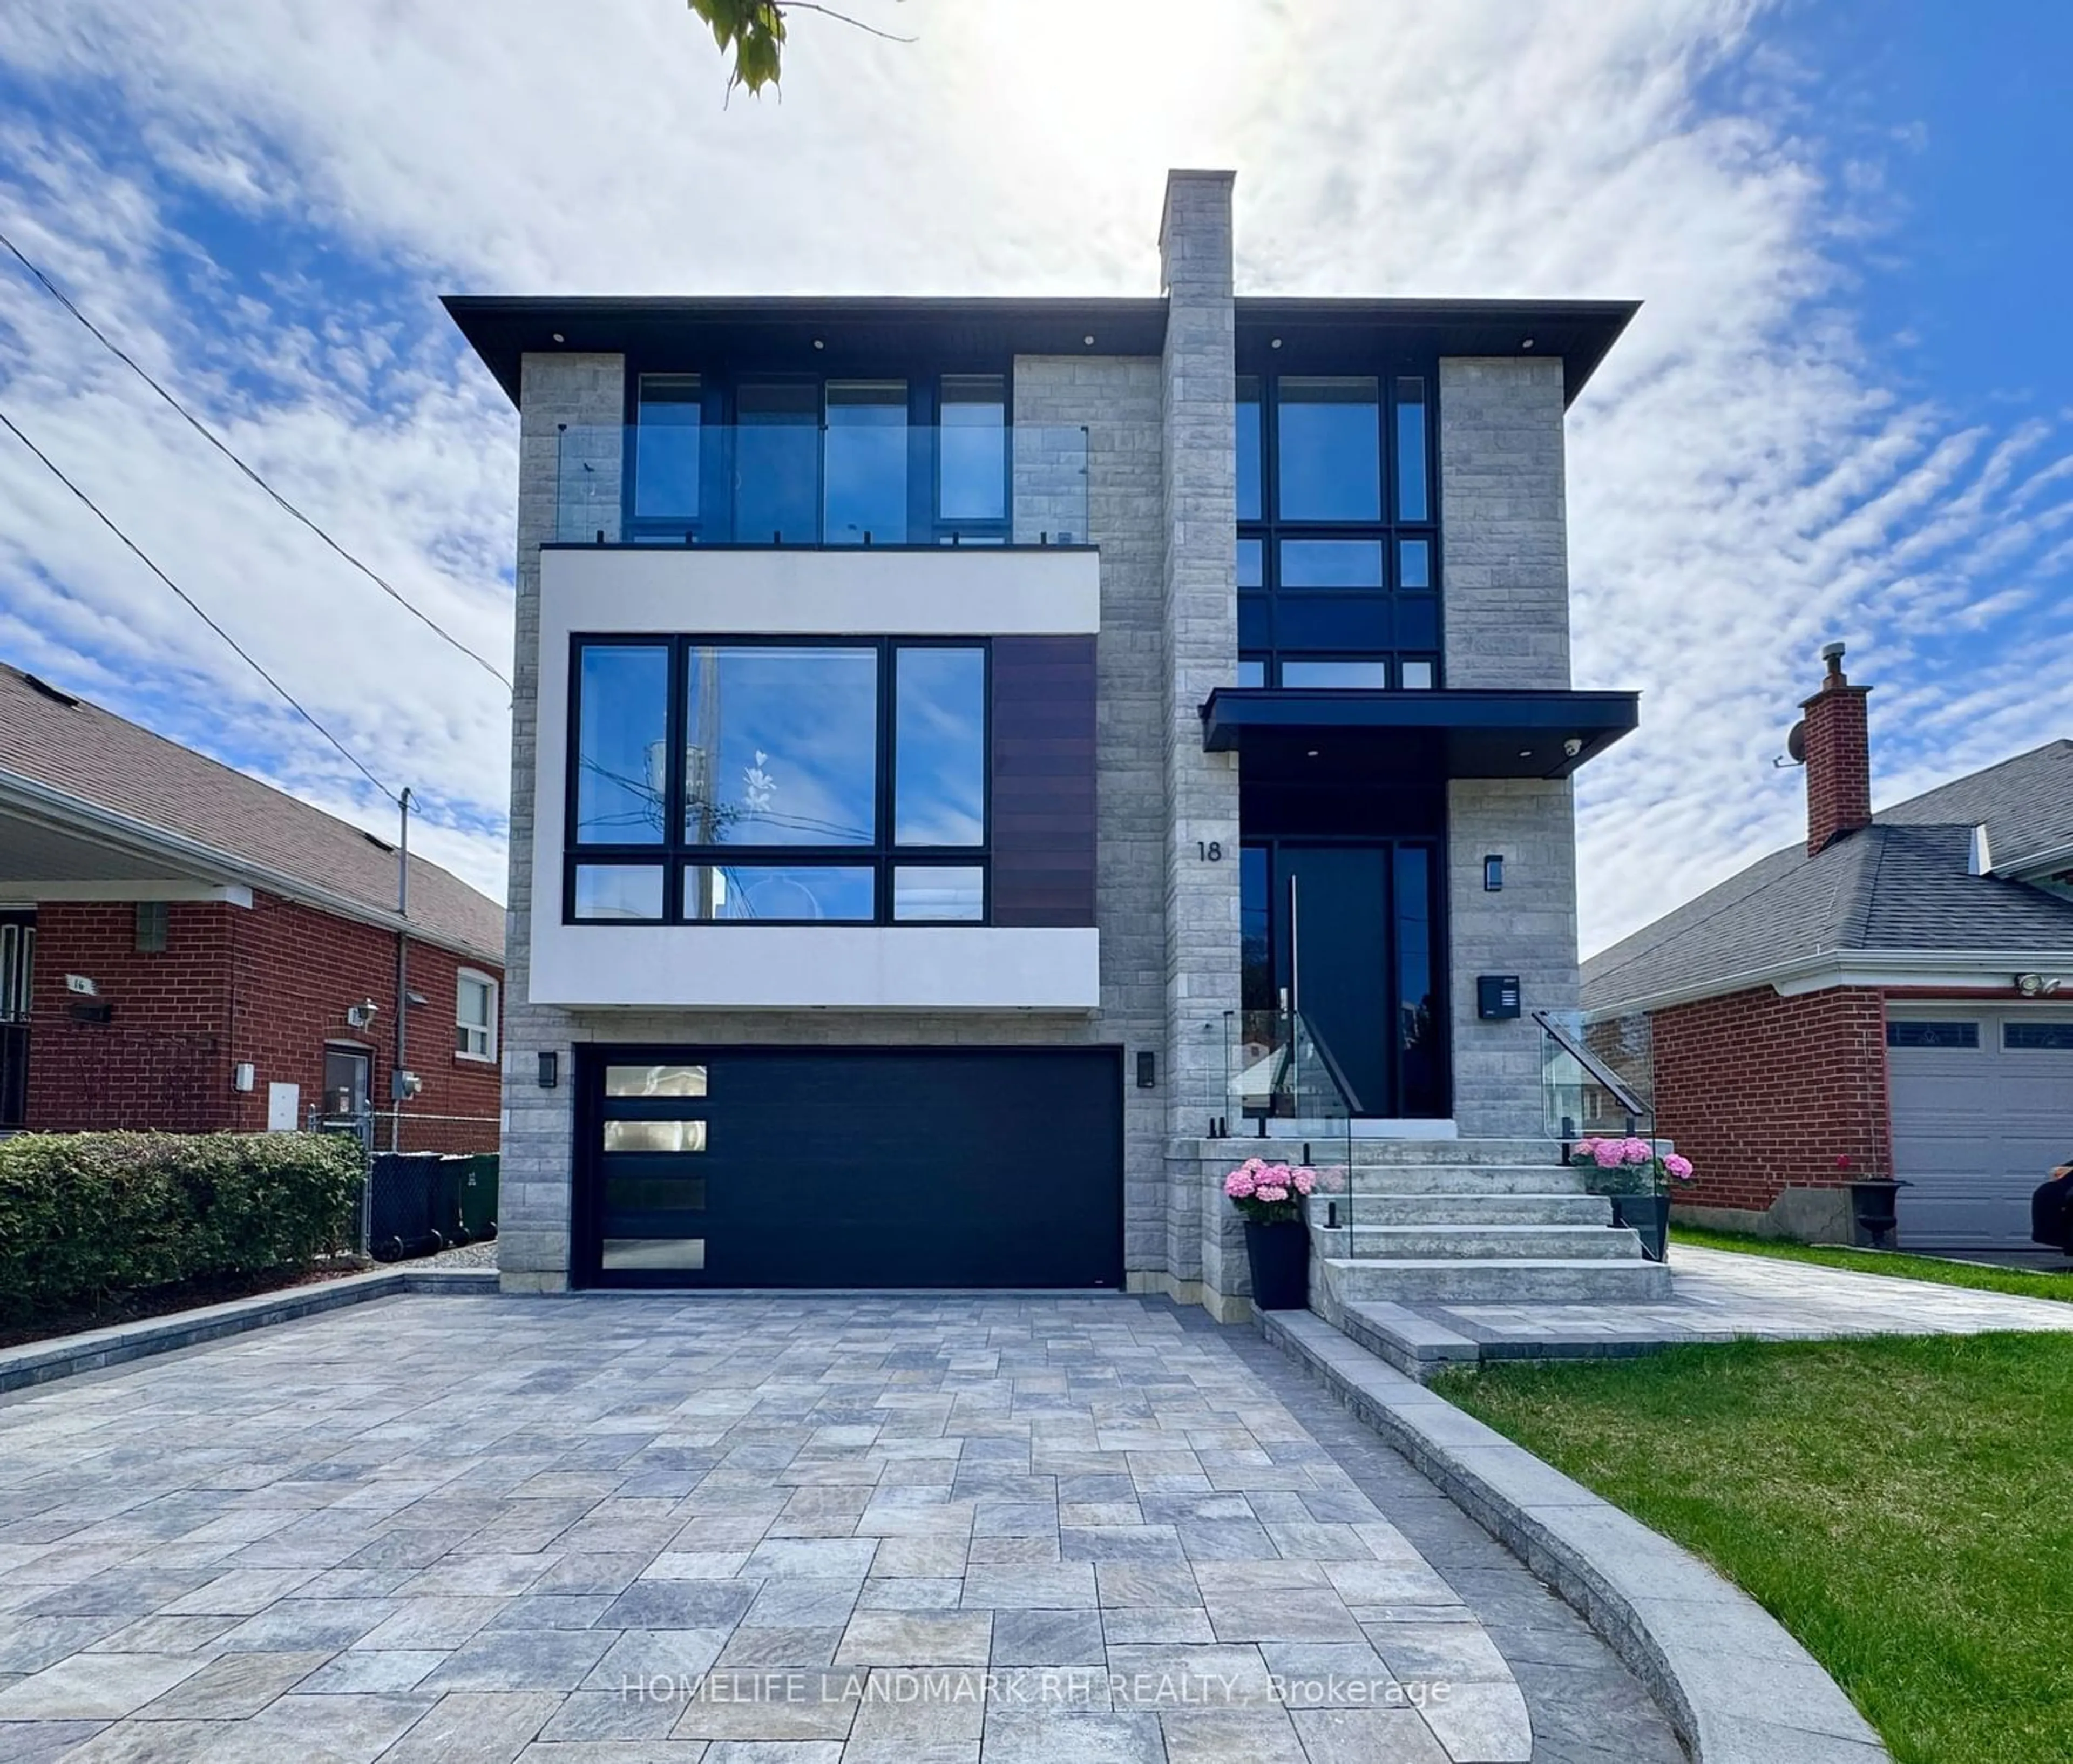 Home with brick exterior material for 18 Almont Rd, Toronto Ontario M3H 3E3